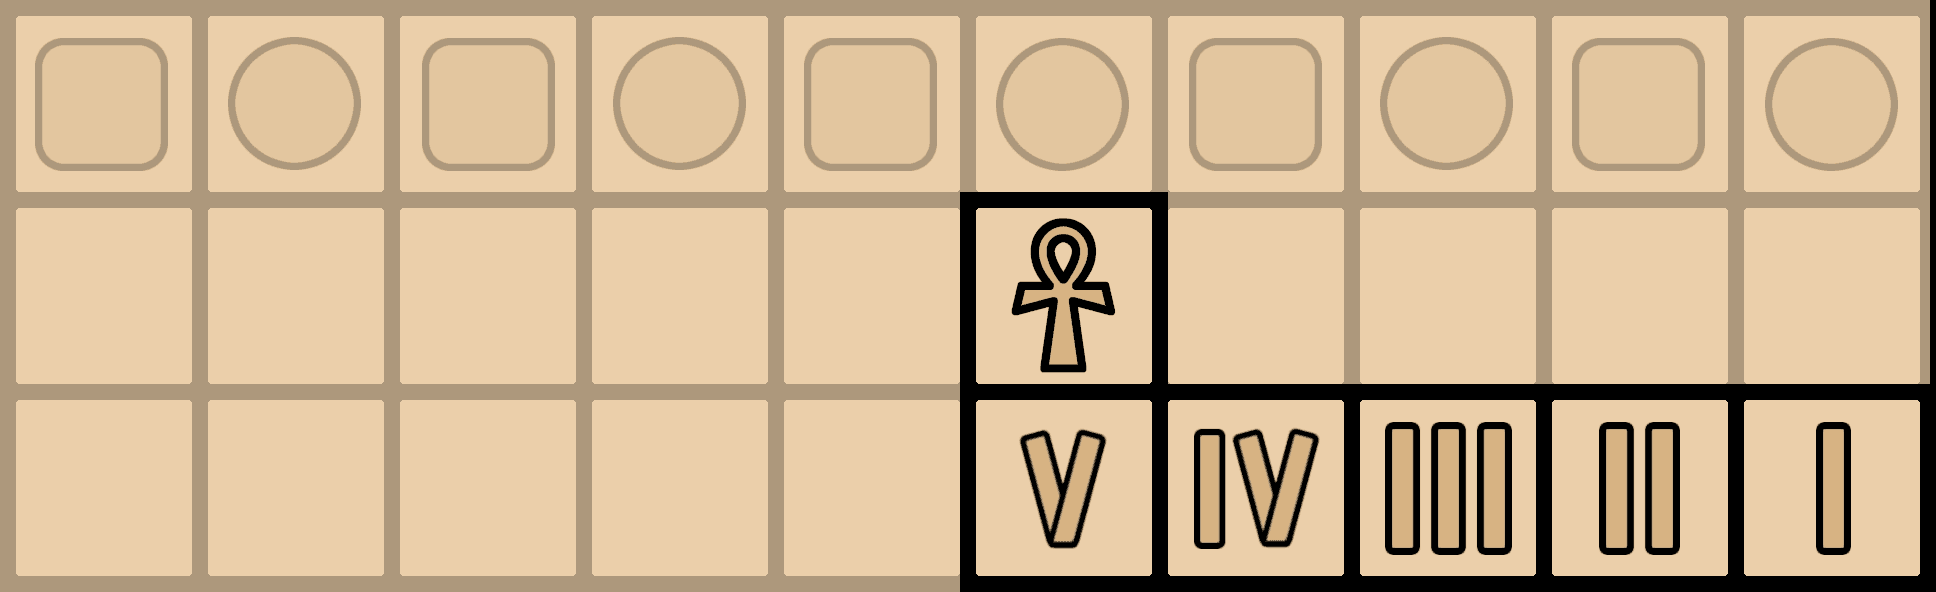 A senet board with the five special tiles at the end of the board highlighted, as well as the special central Ankh tile